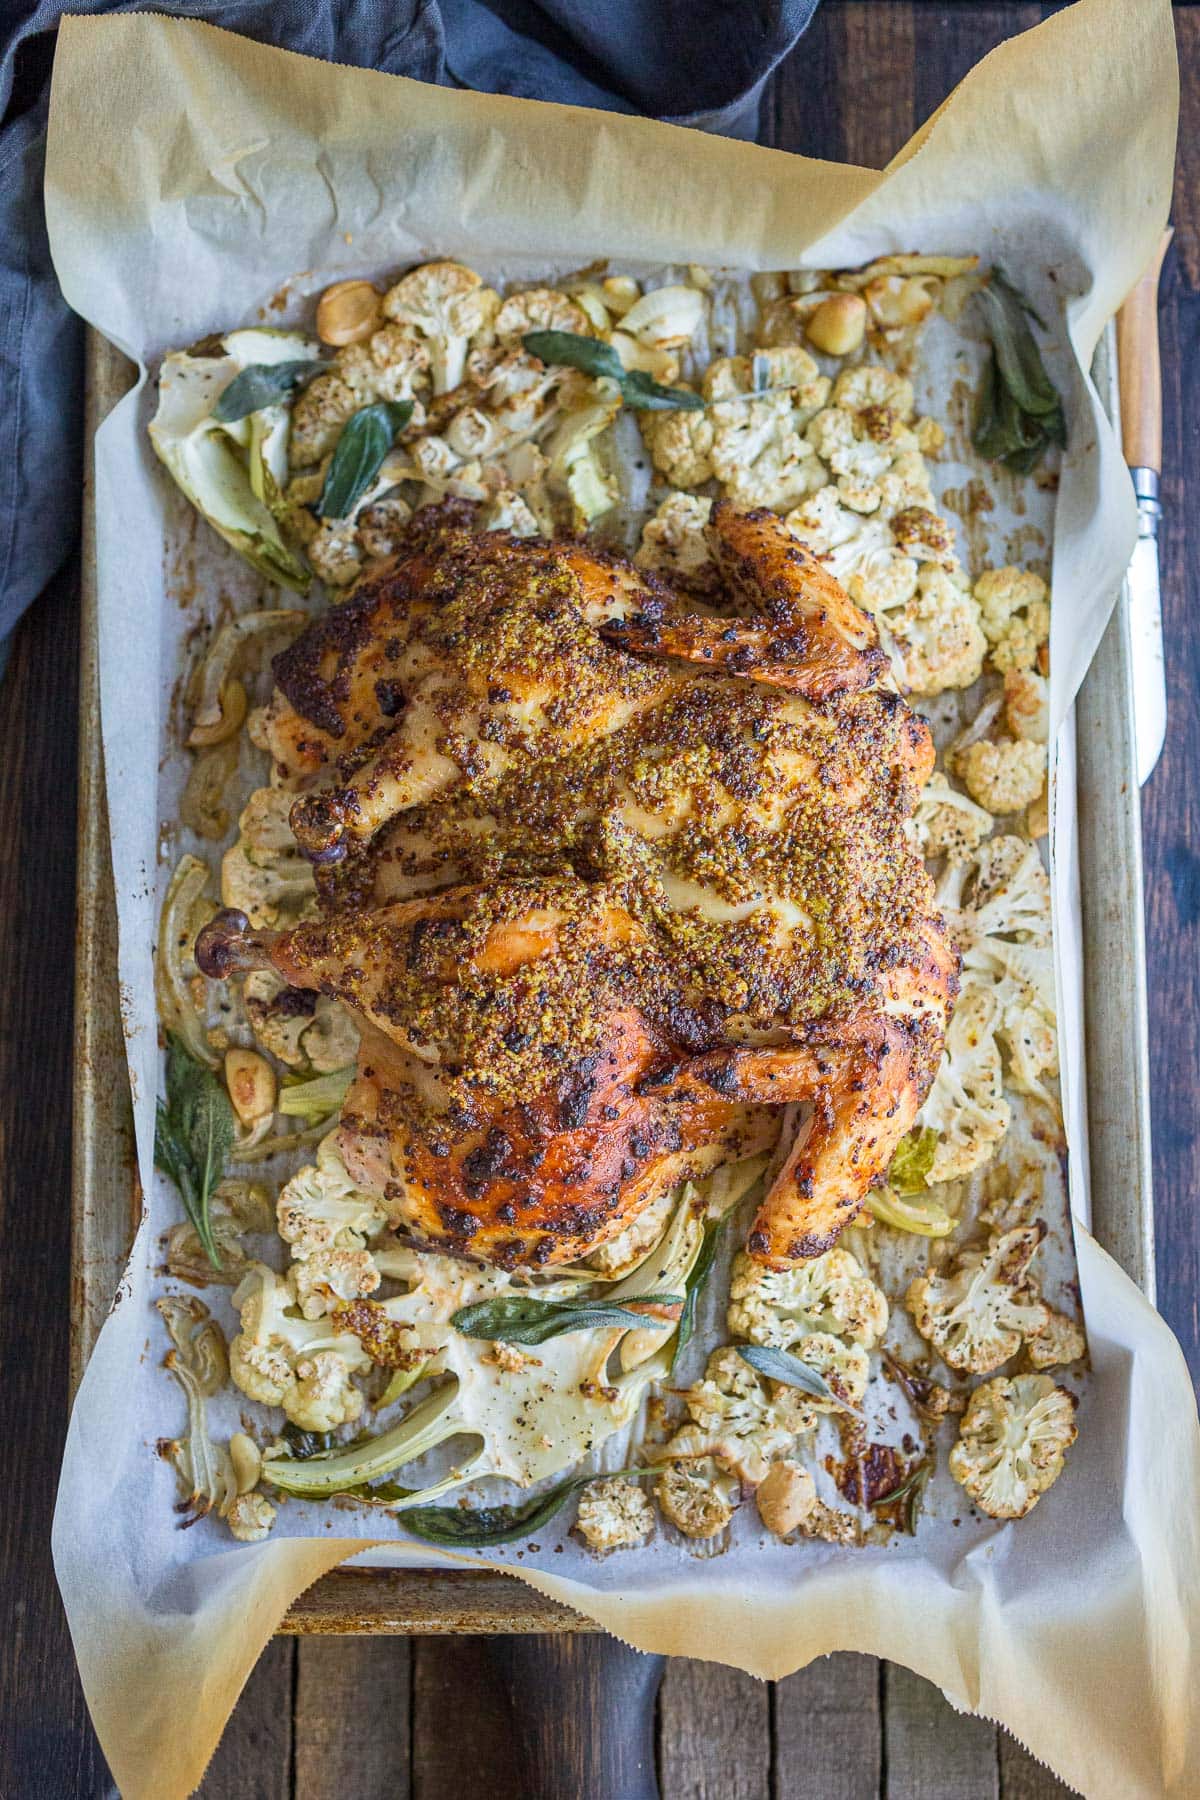 How to spatchcock a chicken: a step by step guide with a video. The chicken is lathered in a mustard seed marinade and roasted over cauliflower steaks- while the drippings from the chicken infuse the cauliflower with goodness and flavor! A delicious one-pan meal